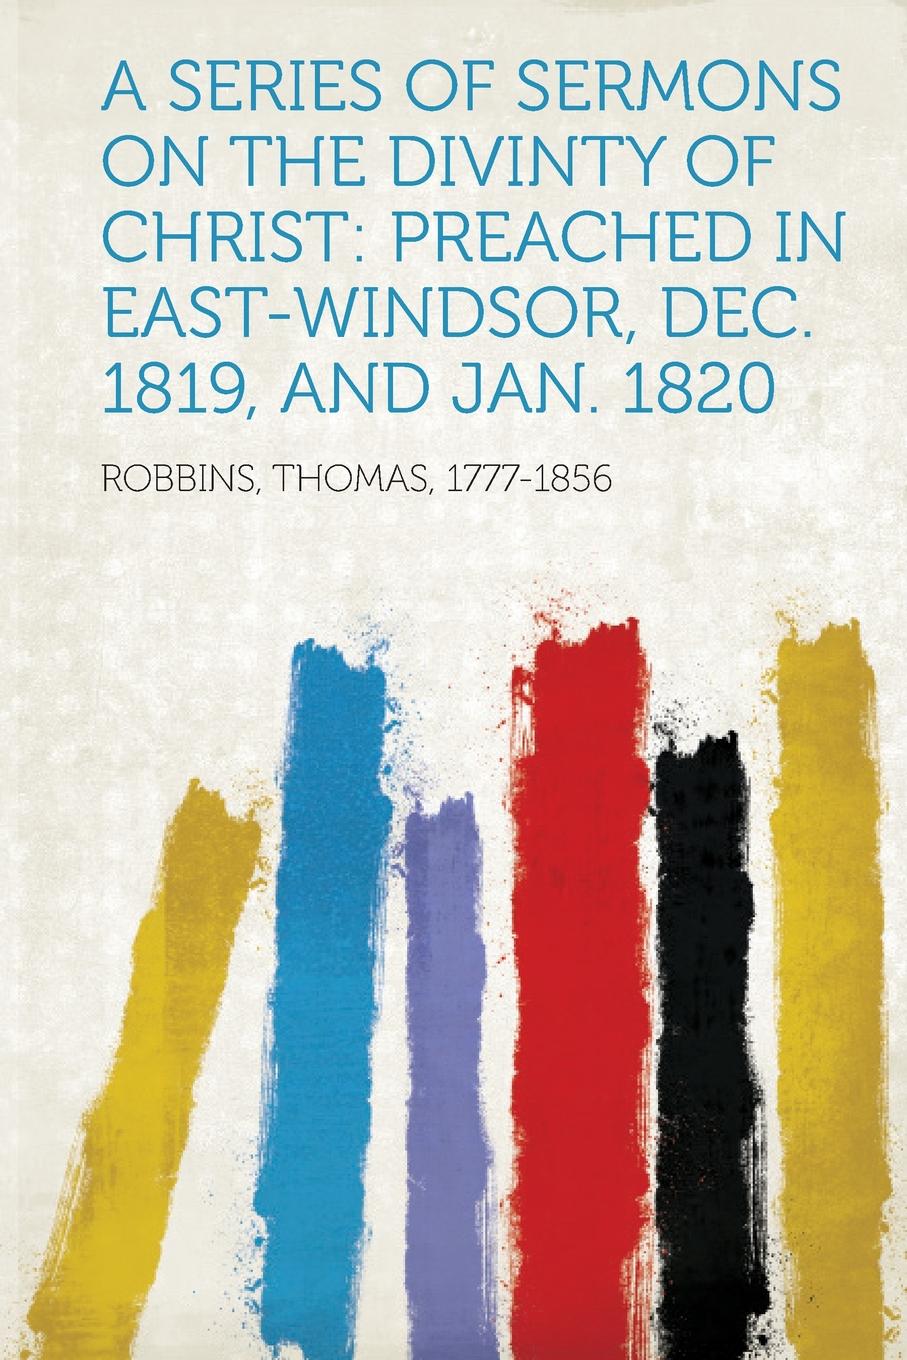 A Series of Sermons on the Divinty of Christ. Preached in East-Windsor, Dec. 1819, and Jan. 1820